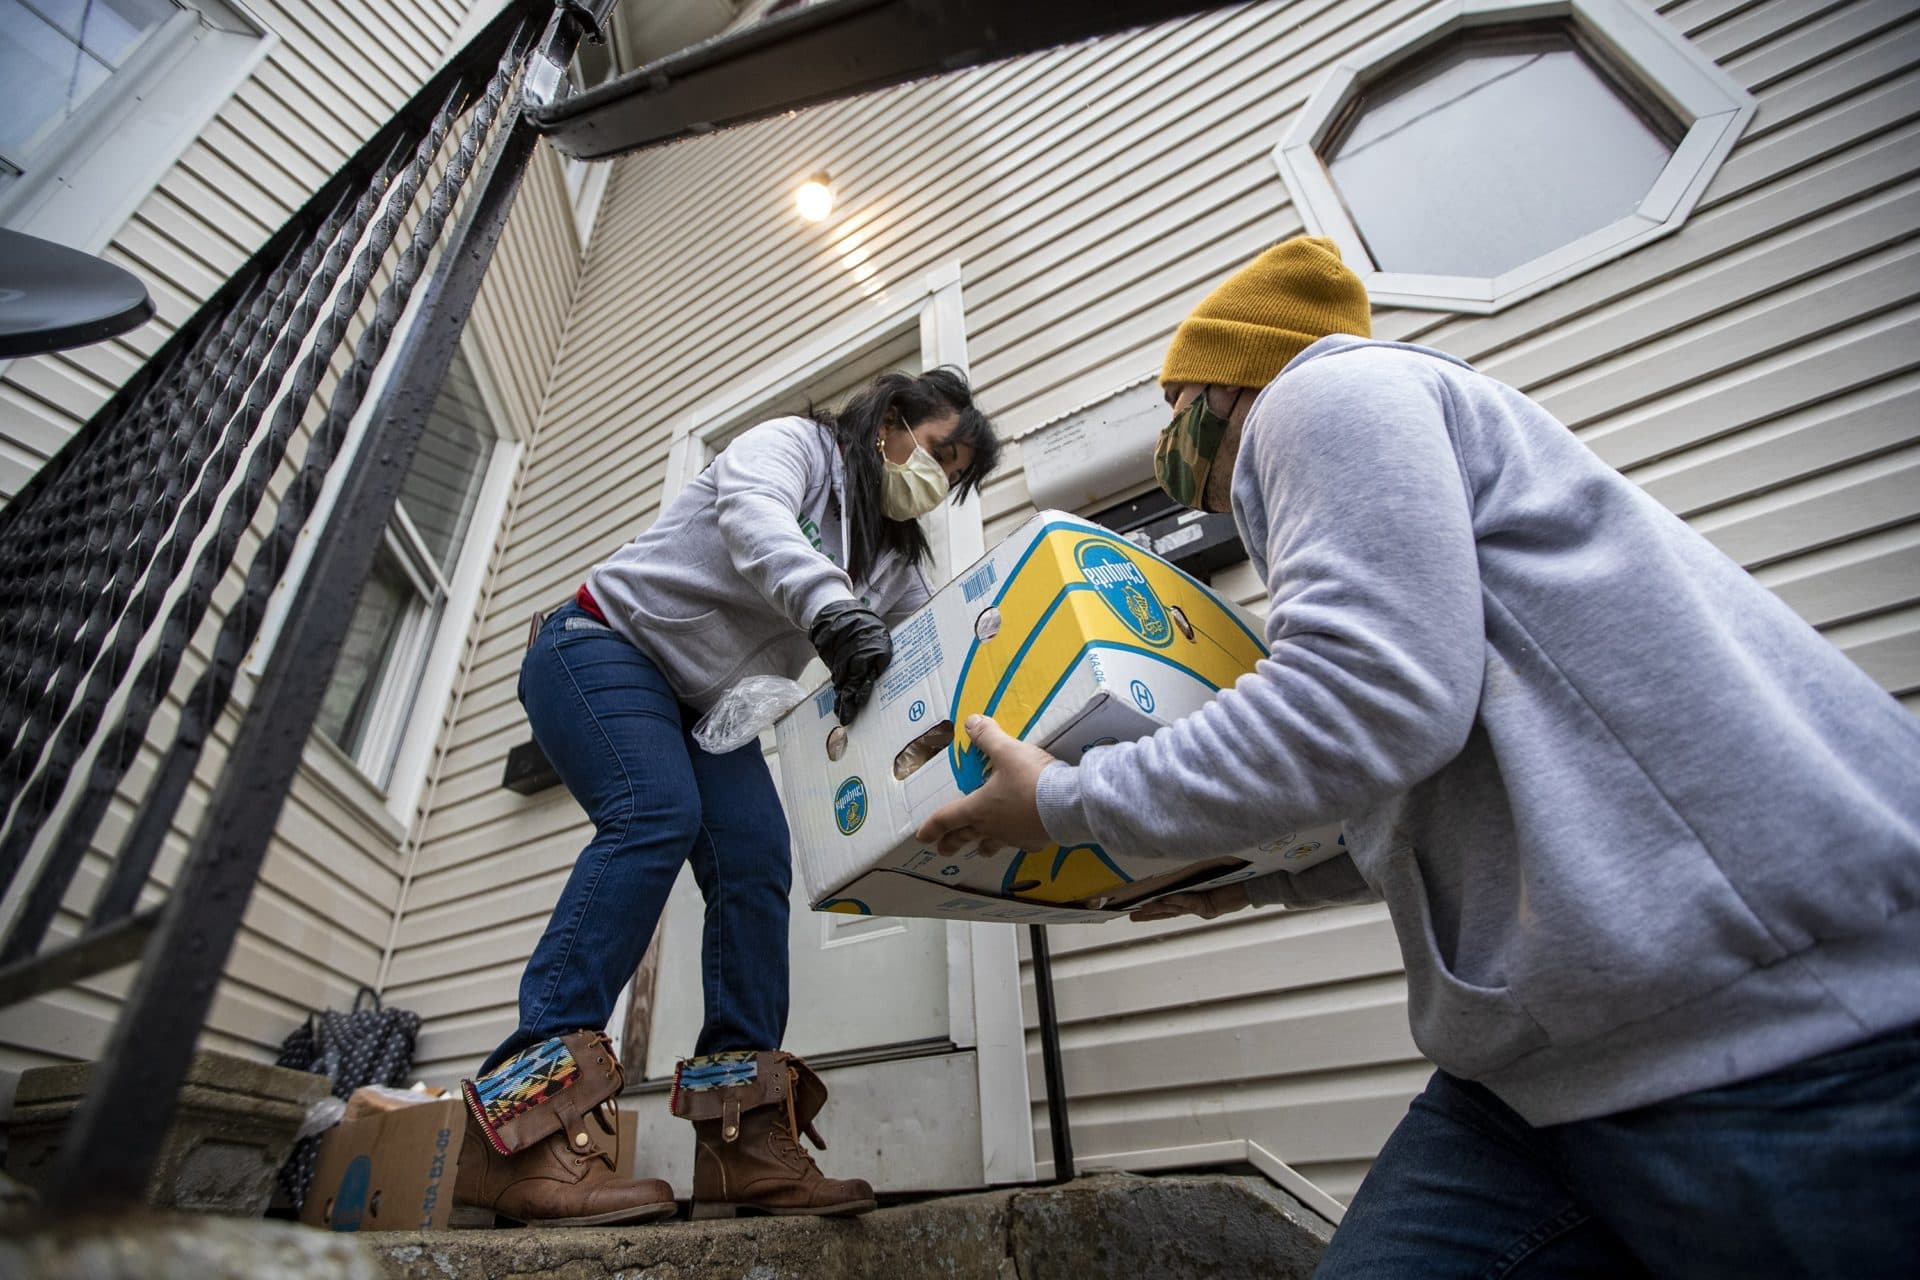 April 9: Reymer Pineda hands a box of donated food to Gladys Vega to leave on the front porch of a house. All members of the household have contracted COVID-19, and will come out after Vega calls them to let them know. (Jesse Costa/WBUR)